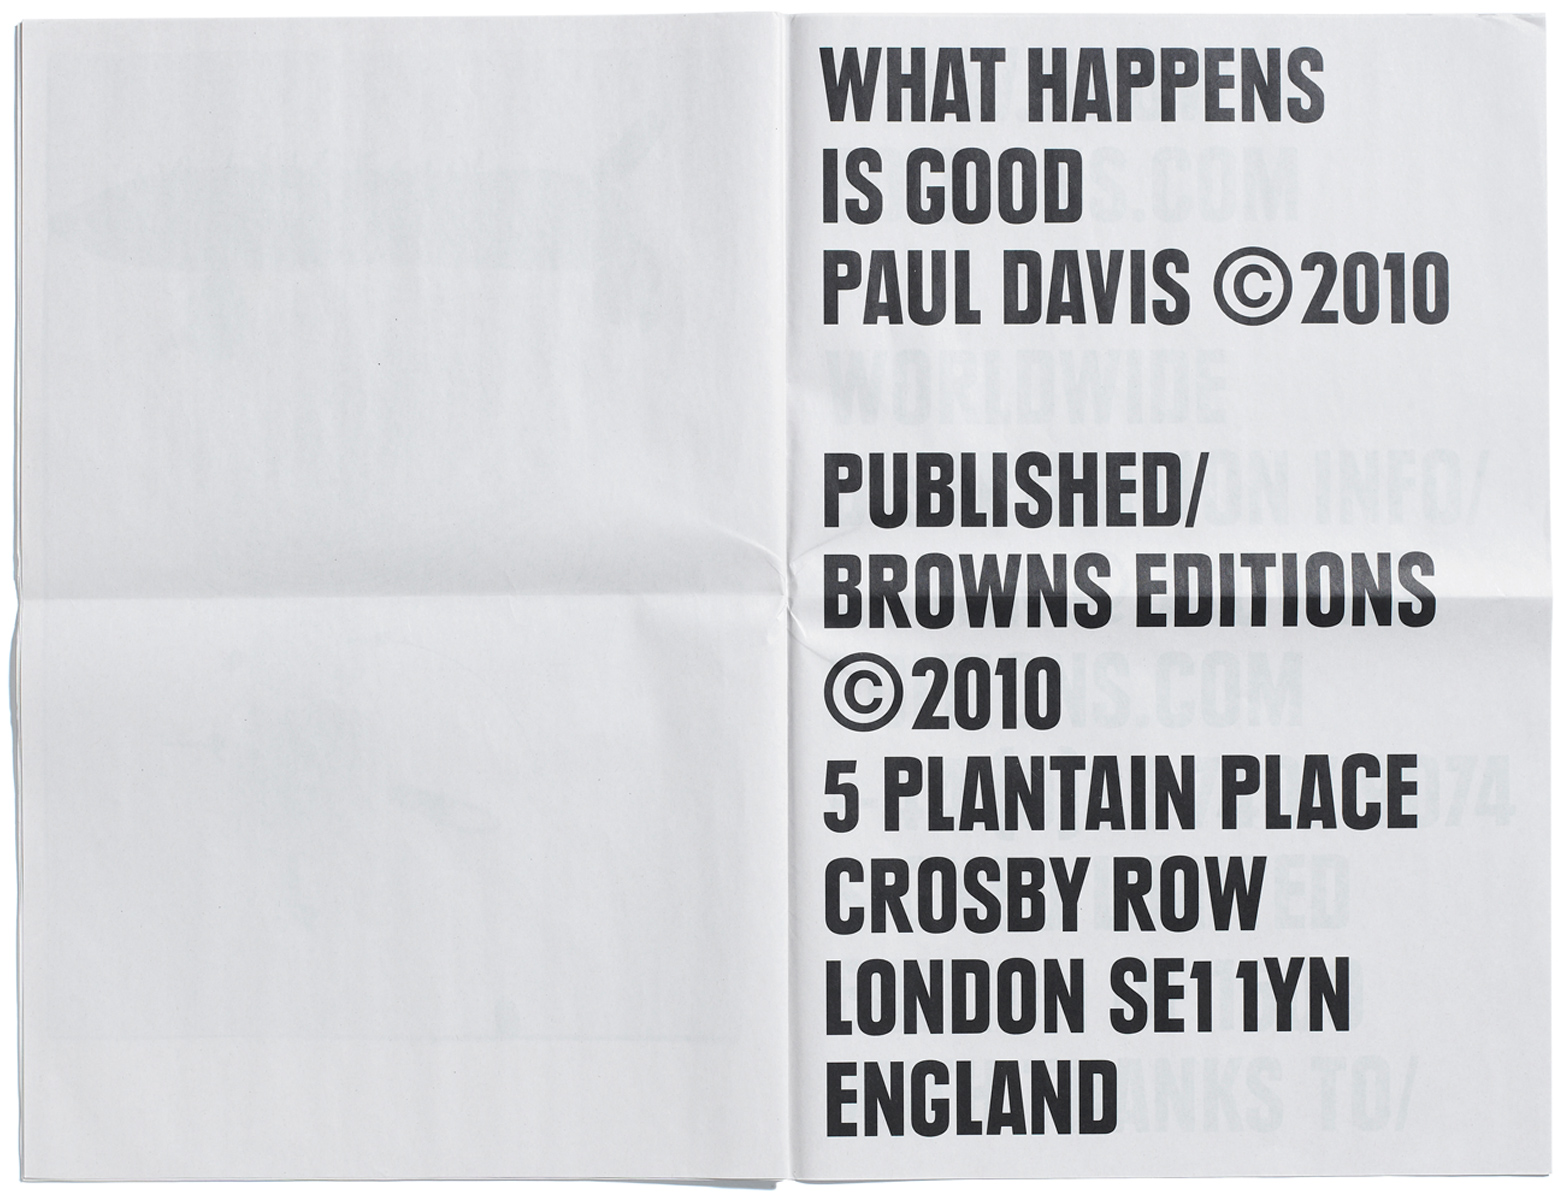 Browns Editions, Browns Editions Publishing, Browns Editions Books, Browns Editions Paul Davis, Browns Editions What Happens Is Good and The Twinkling Of An Eye, Browns Editions Paul Davis What Happens Is Good and The Twinkling Of An Eye